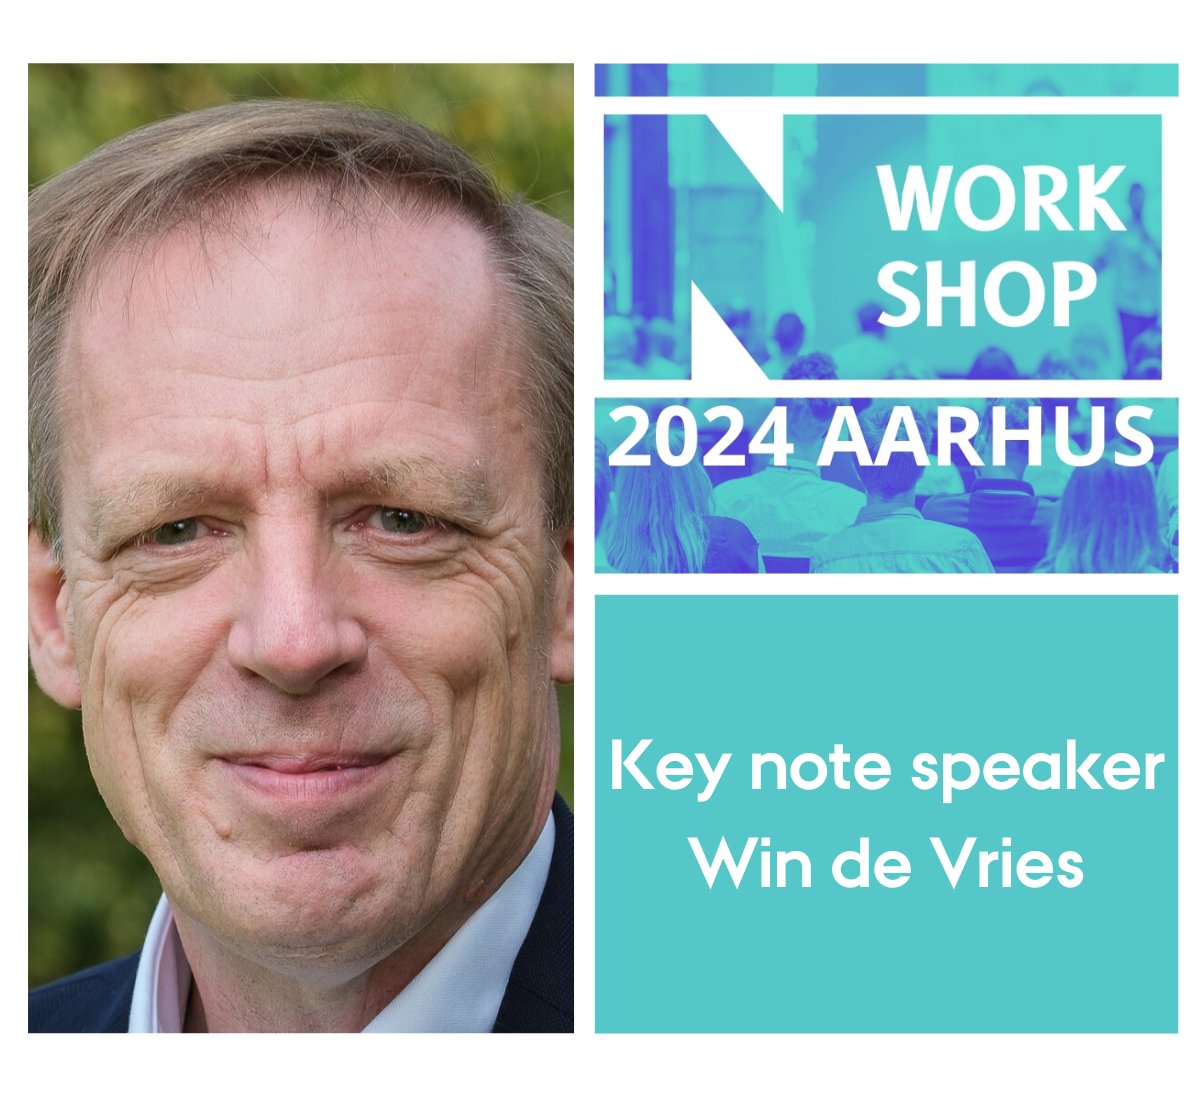 🌟🌱 Excited for #NWorkshop2024! Join us to meet keynote speaker Professor Wim de Vries from @WUR. With over 600 publications, his insights on biogeochemistry and nutrient cycling are invaluable. conferences.au.dk/nworkshop/spea… #SustainableAgriculture #NutrientCycling #NWorkshop